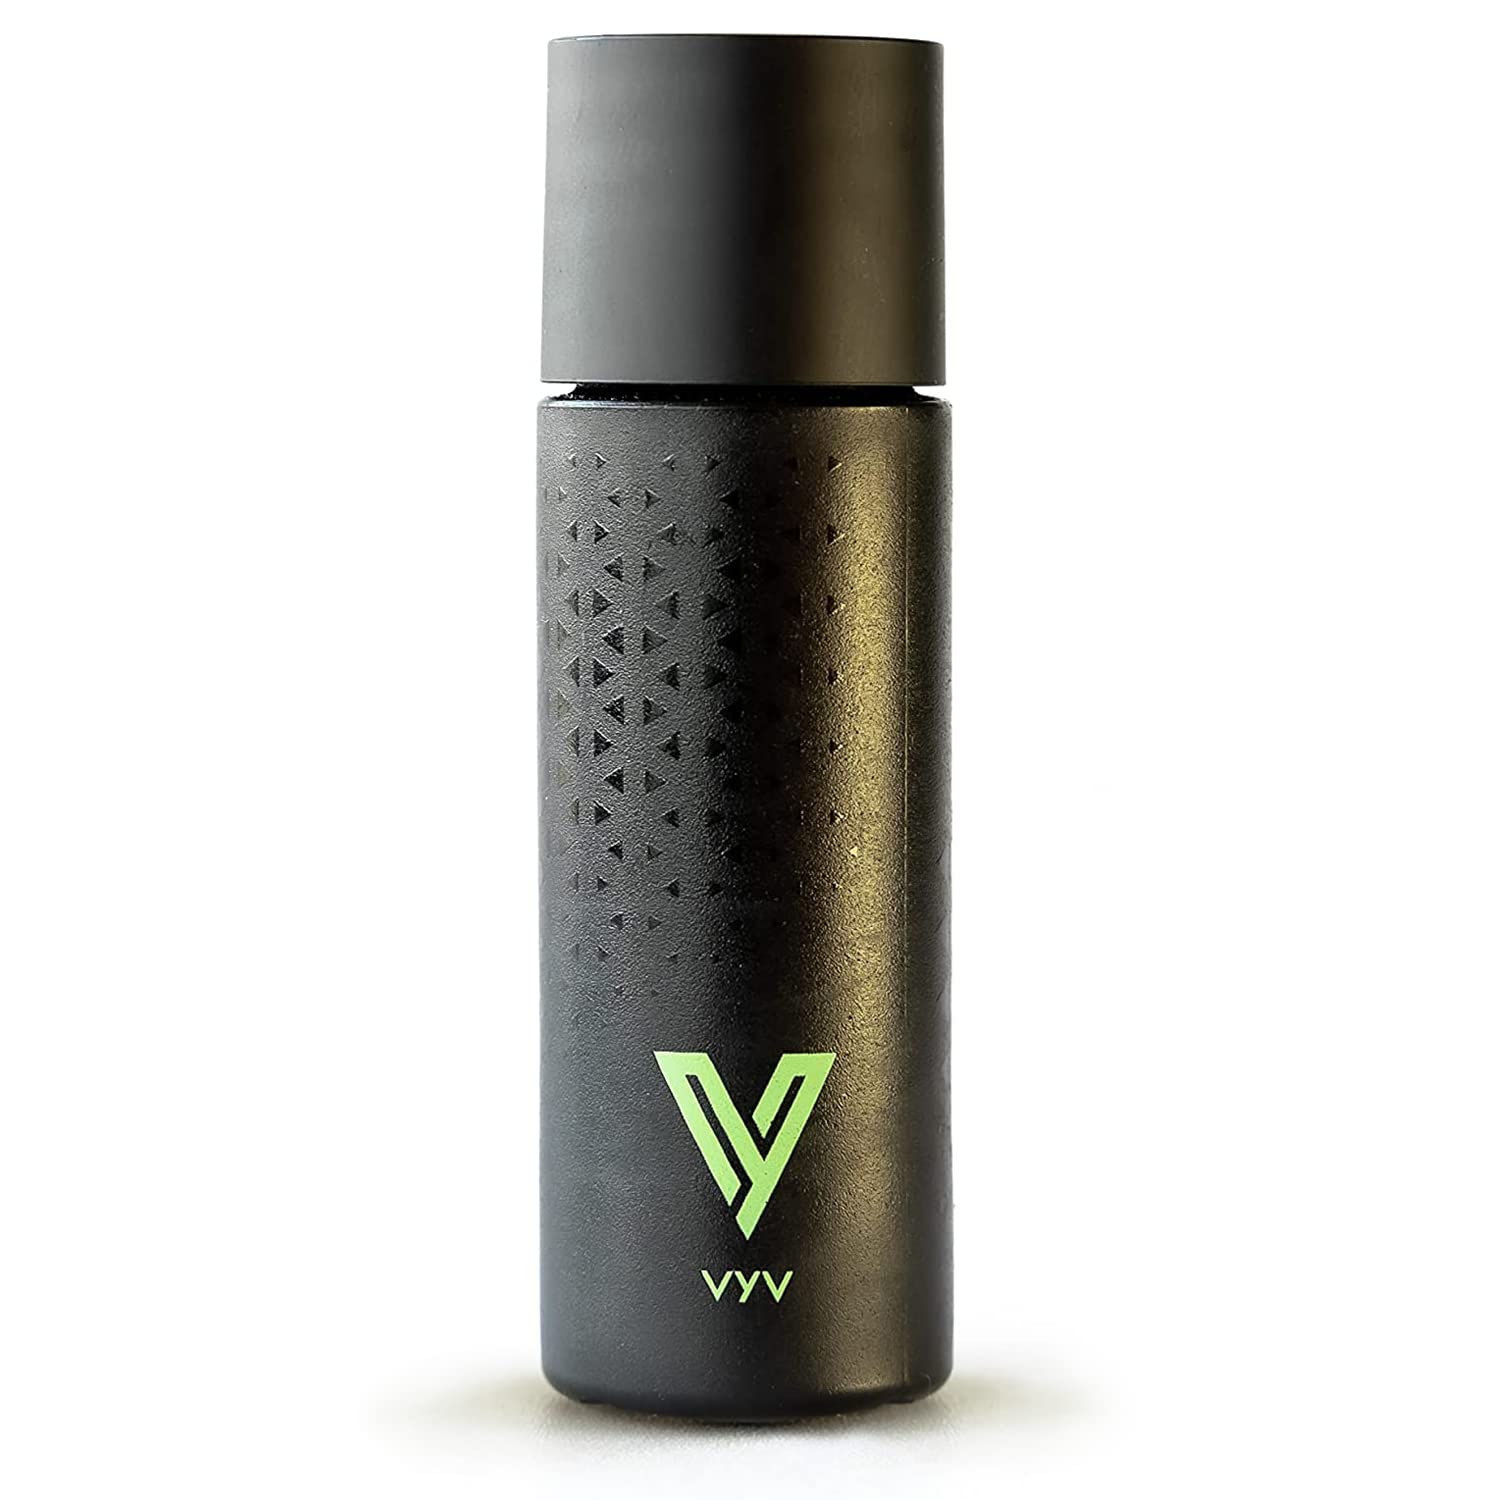 VYV Smelling Salts Ammonia Inhalant | On-The-Go, Instant Wakefulness, Mental Reset, Focus | Squeezable, Reusable, Mint Essential Oil | Gym, Sports, Partying